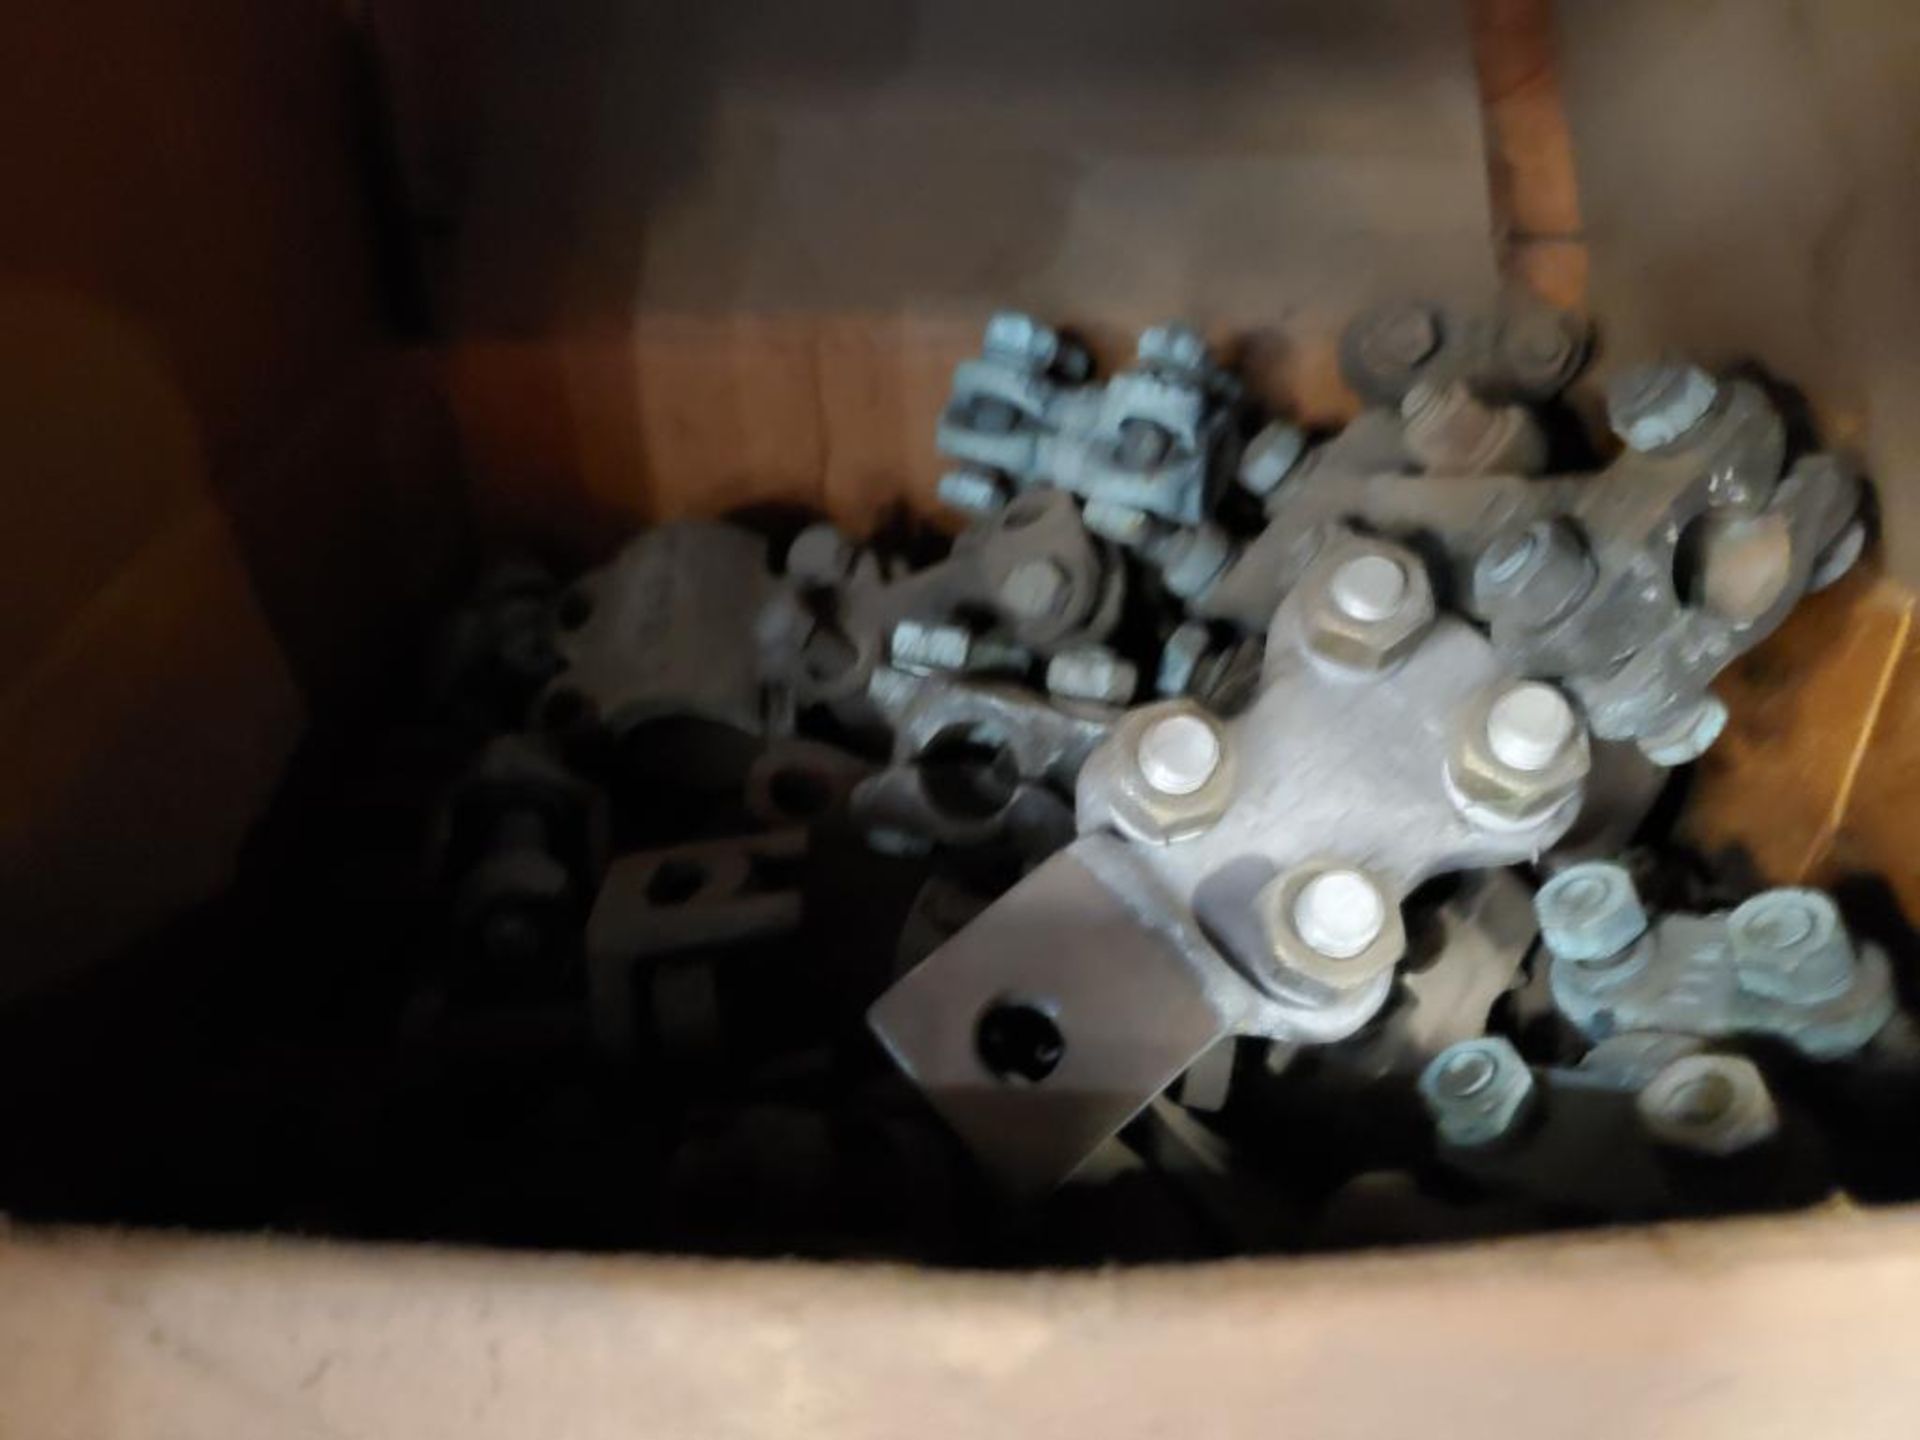 Contents of one shelf cubby - Large assortment of electrical lugs, fittings, and connectors. - Image 5 of 8